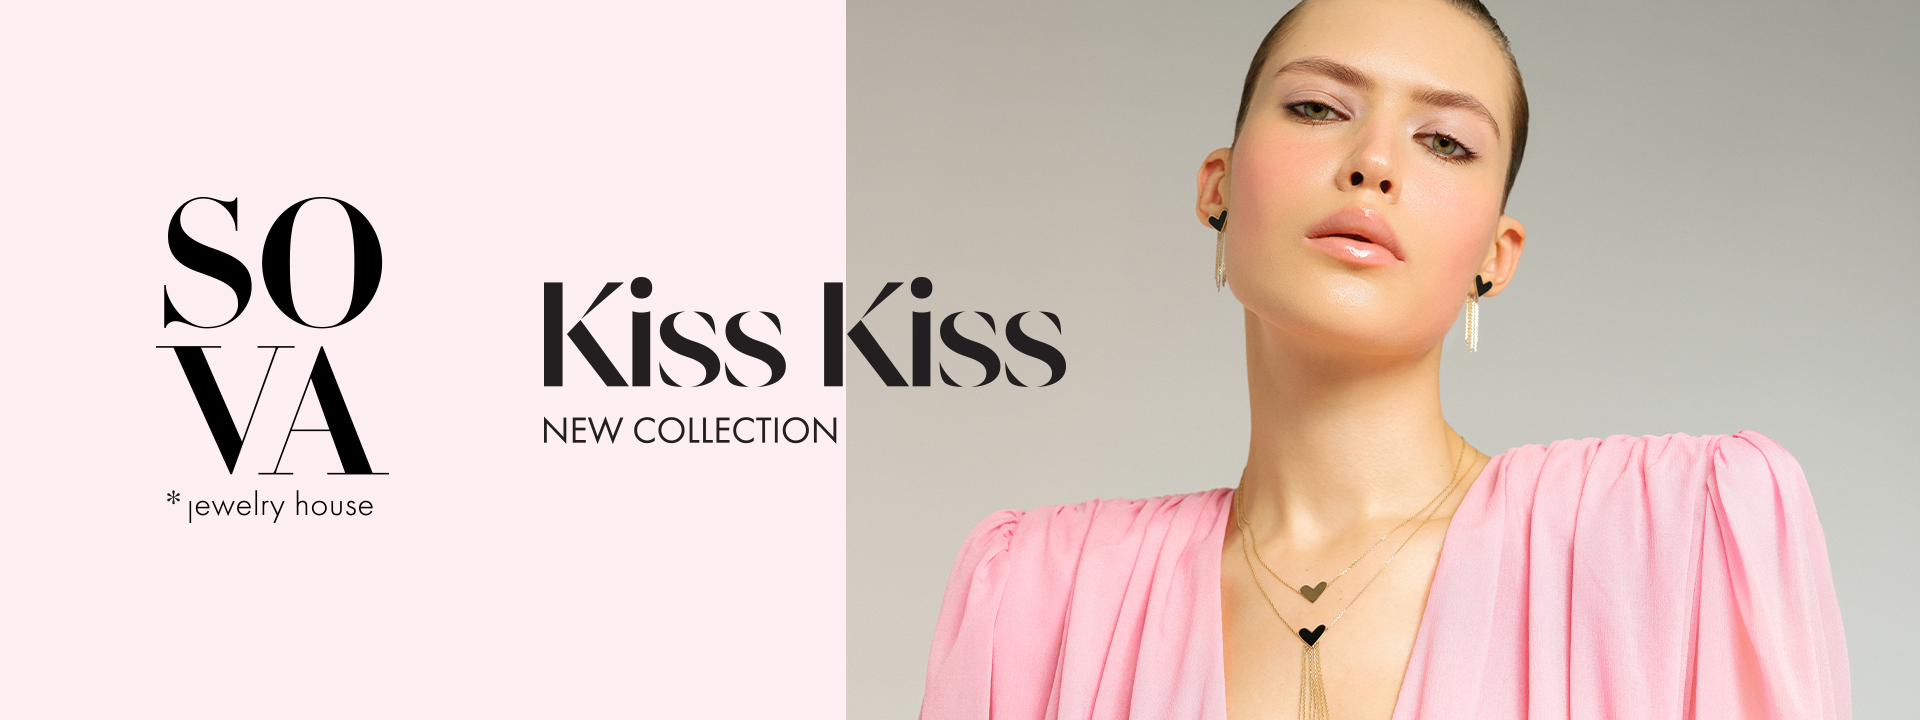 New KISS KISS collection from SOVA